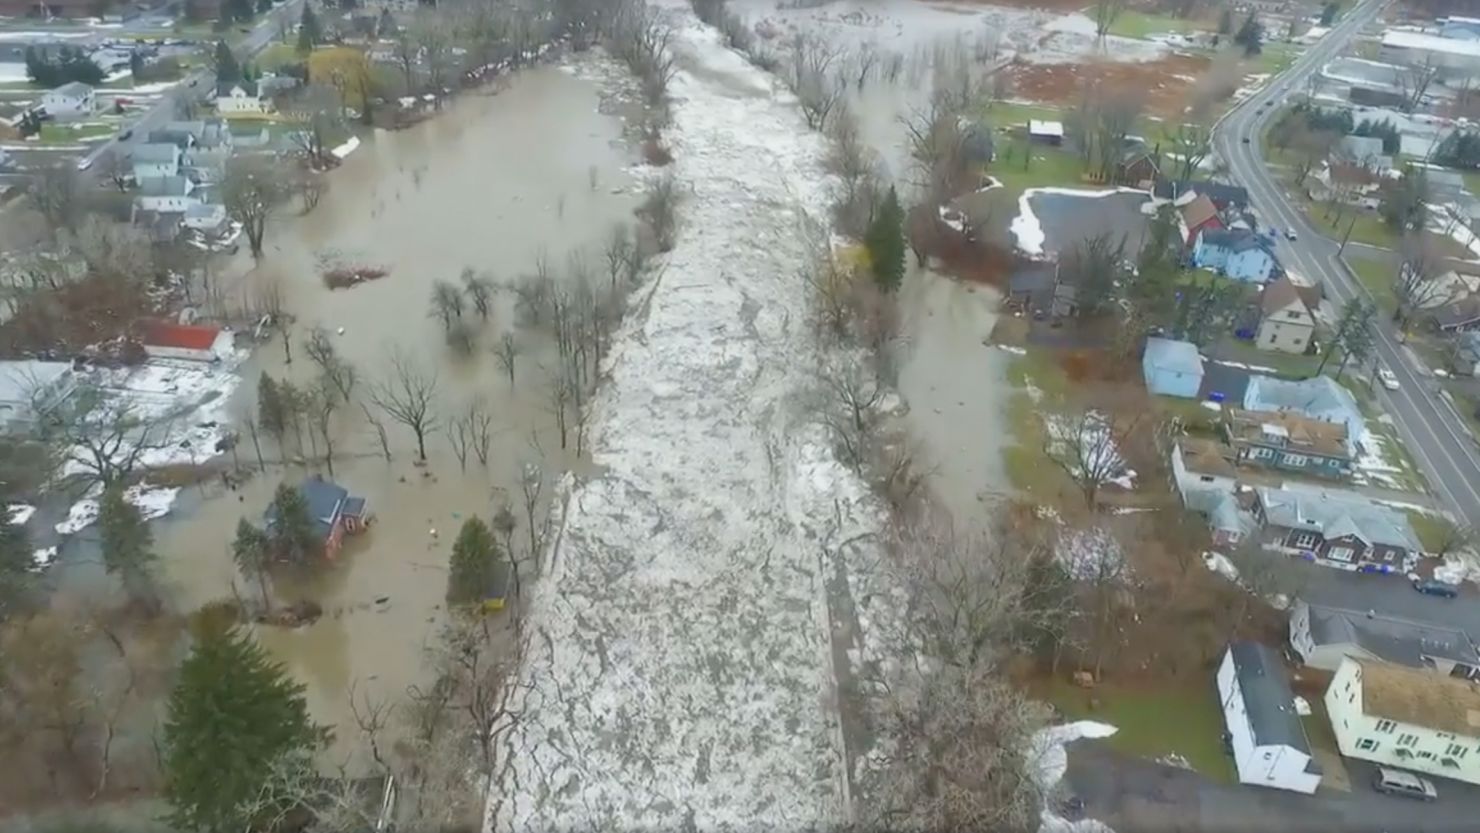 Ice jammed up Buffalo Creek in West Seneca, New York, this week, spilling water into the community and causing some residents to evacuate.